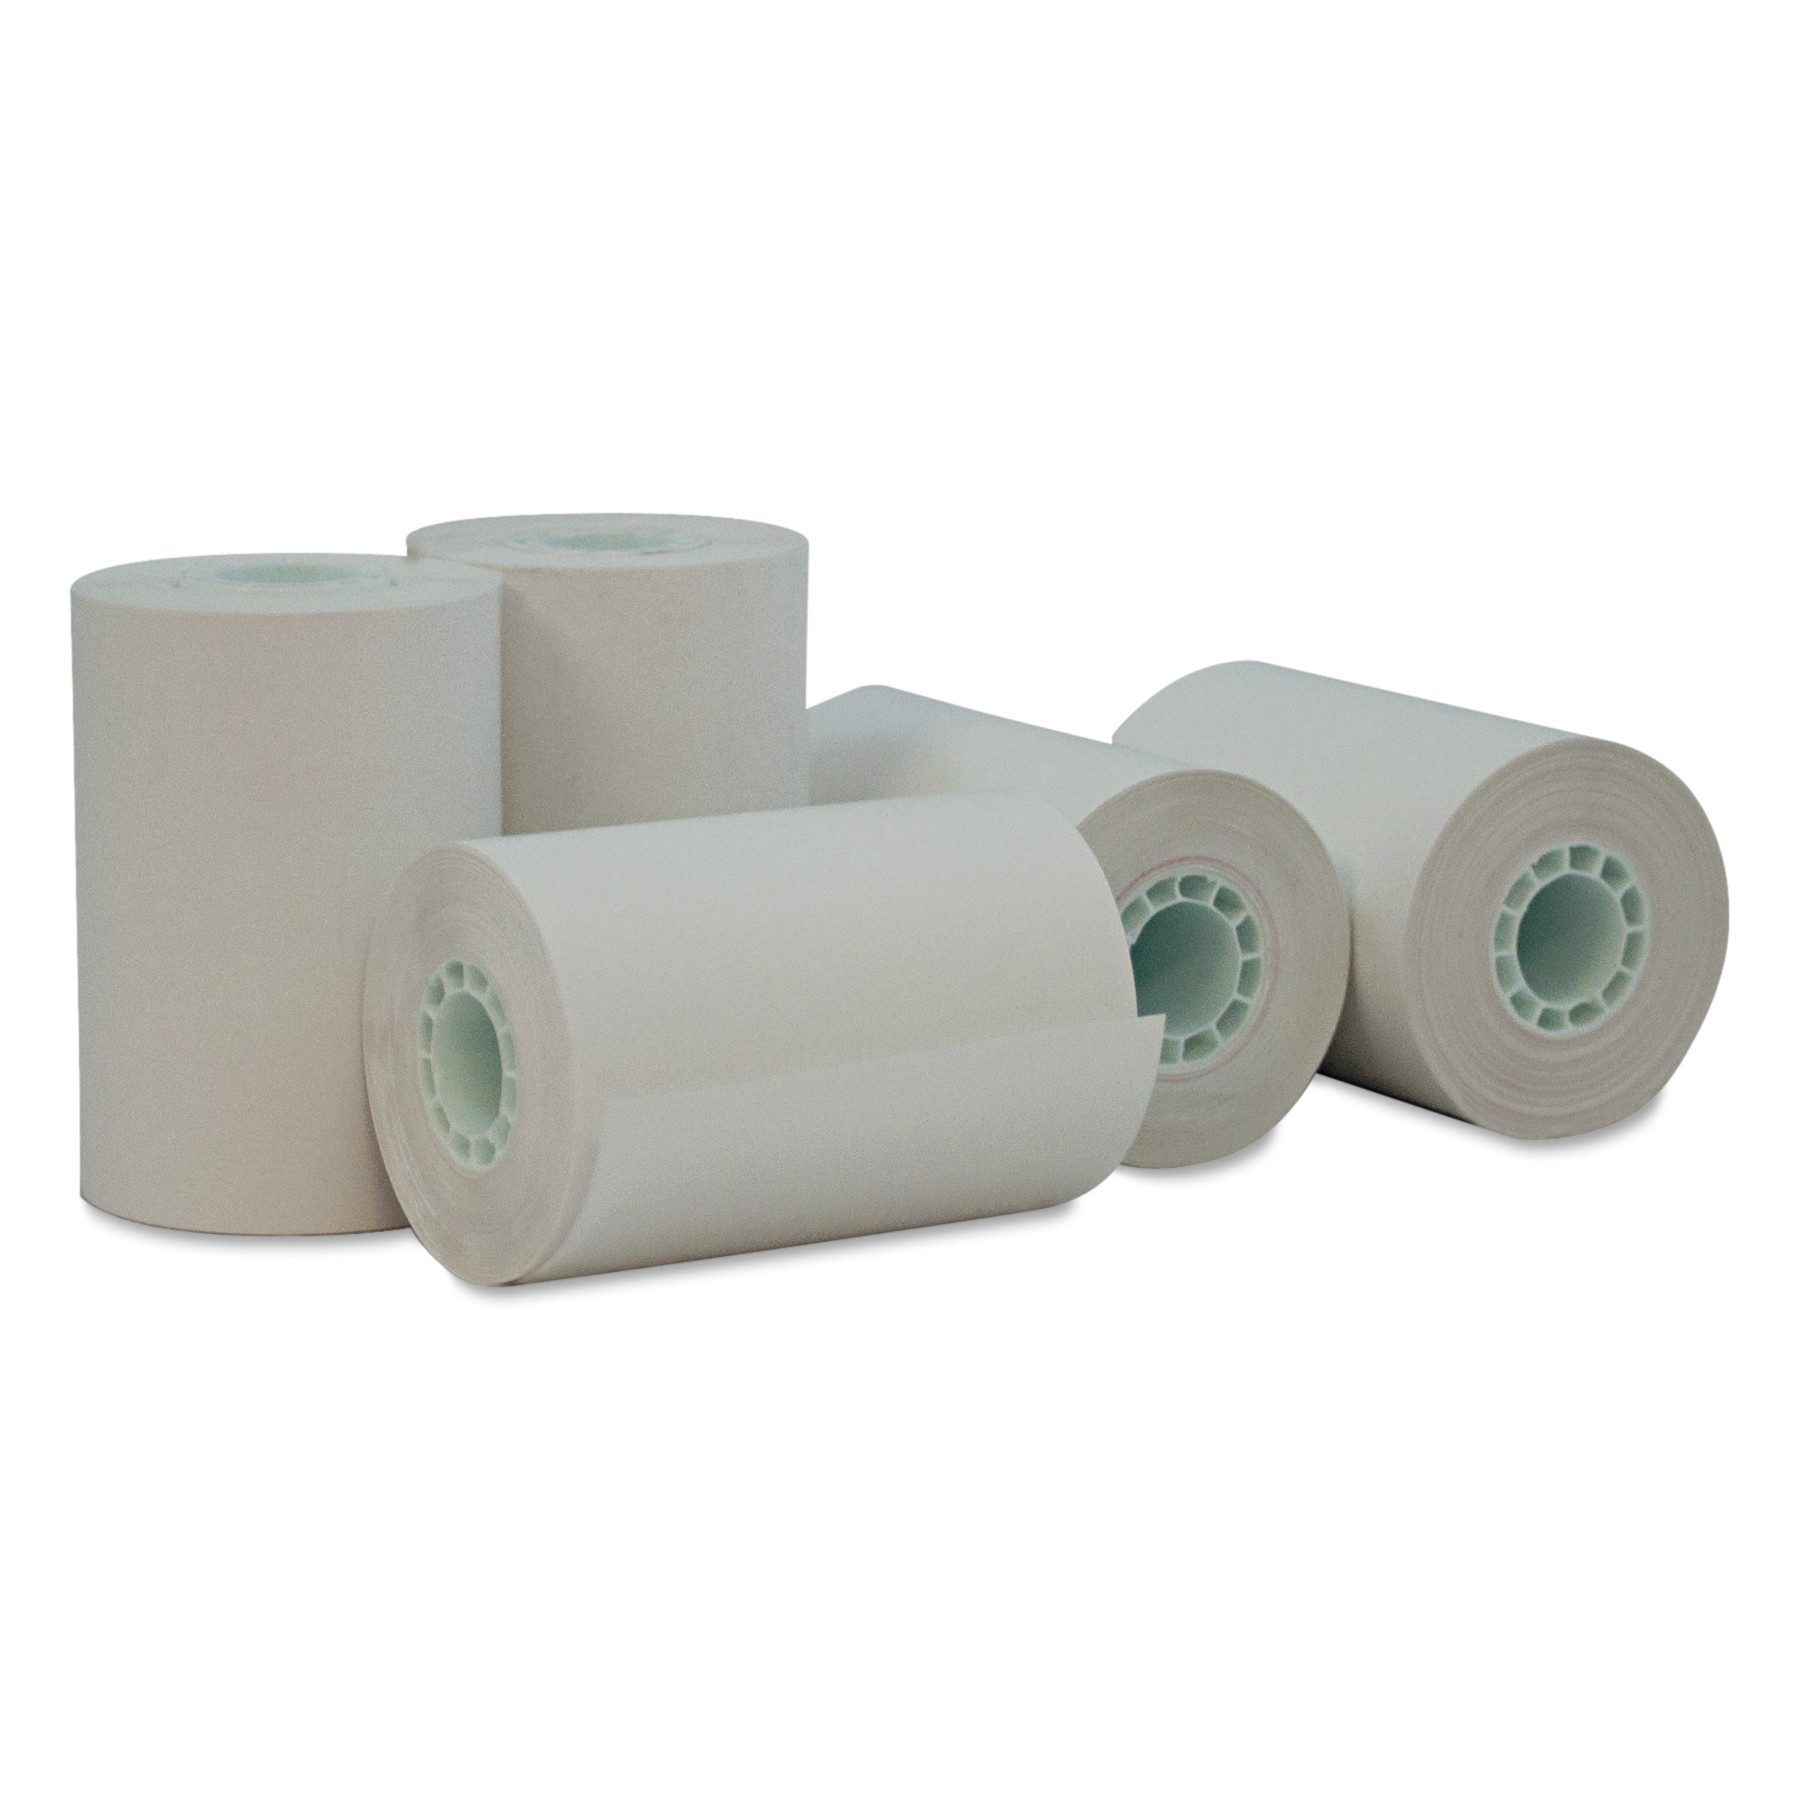 Universal Single-Ply Thermal Paper Rolls, 2 1/4 x 55 ft, White, 50/Carton